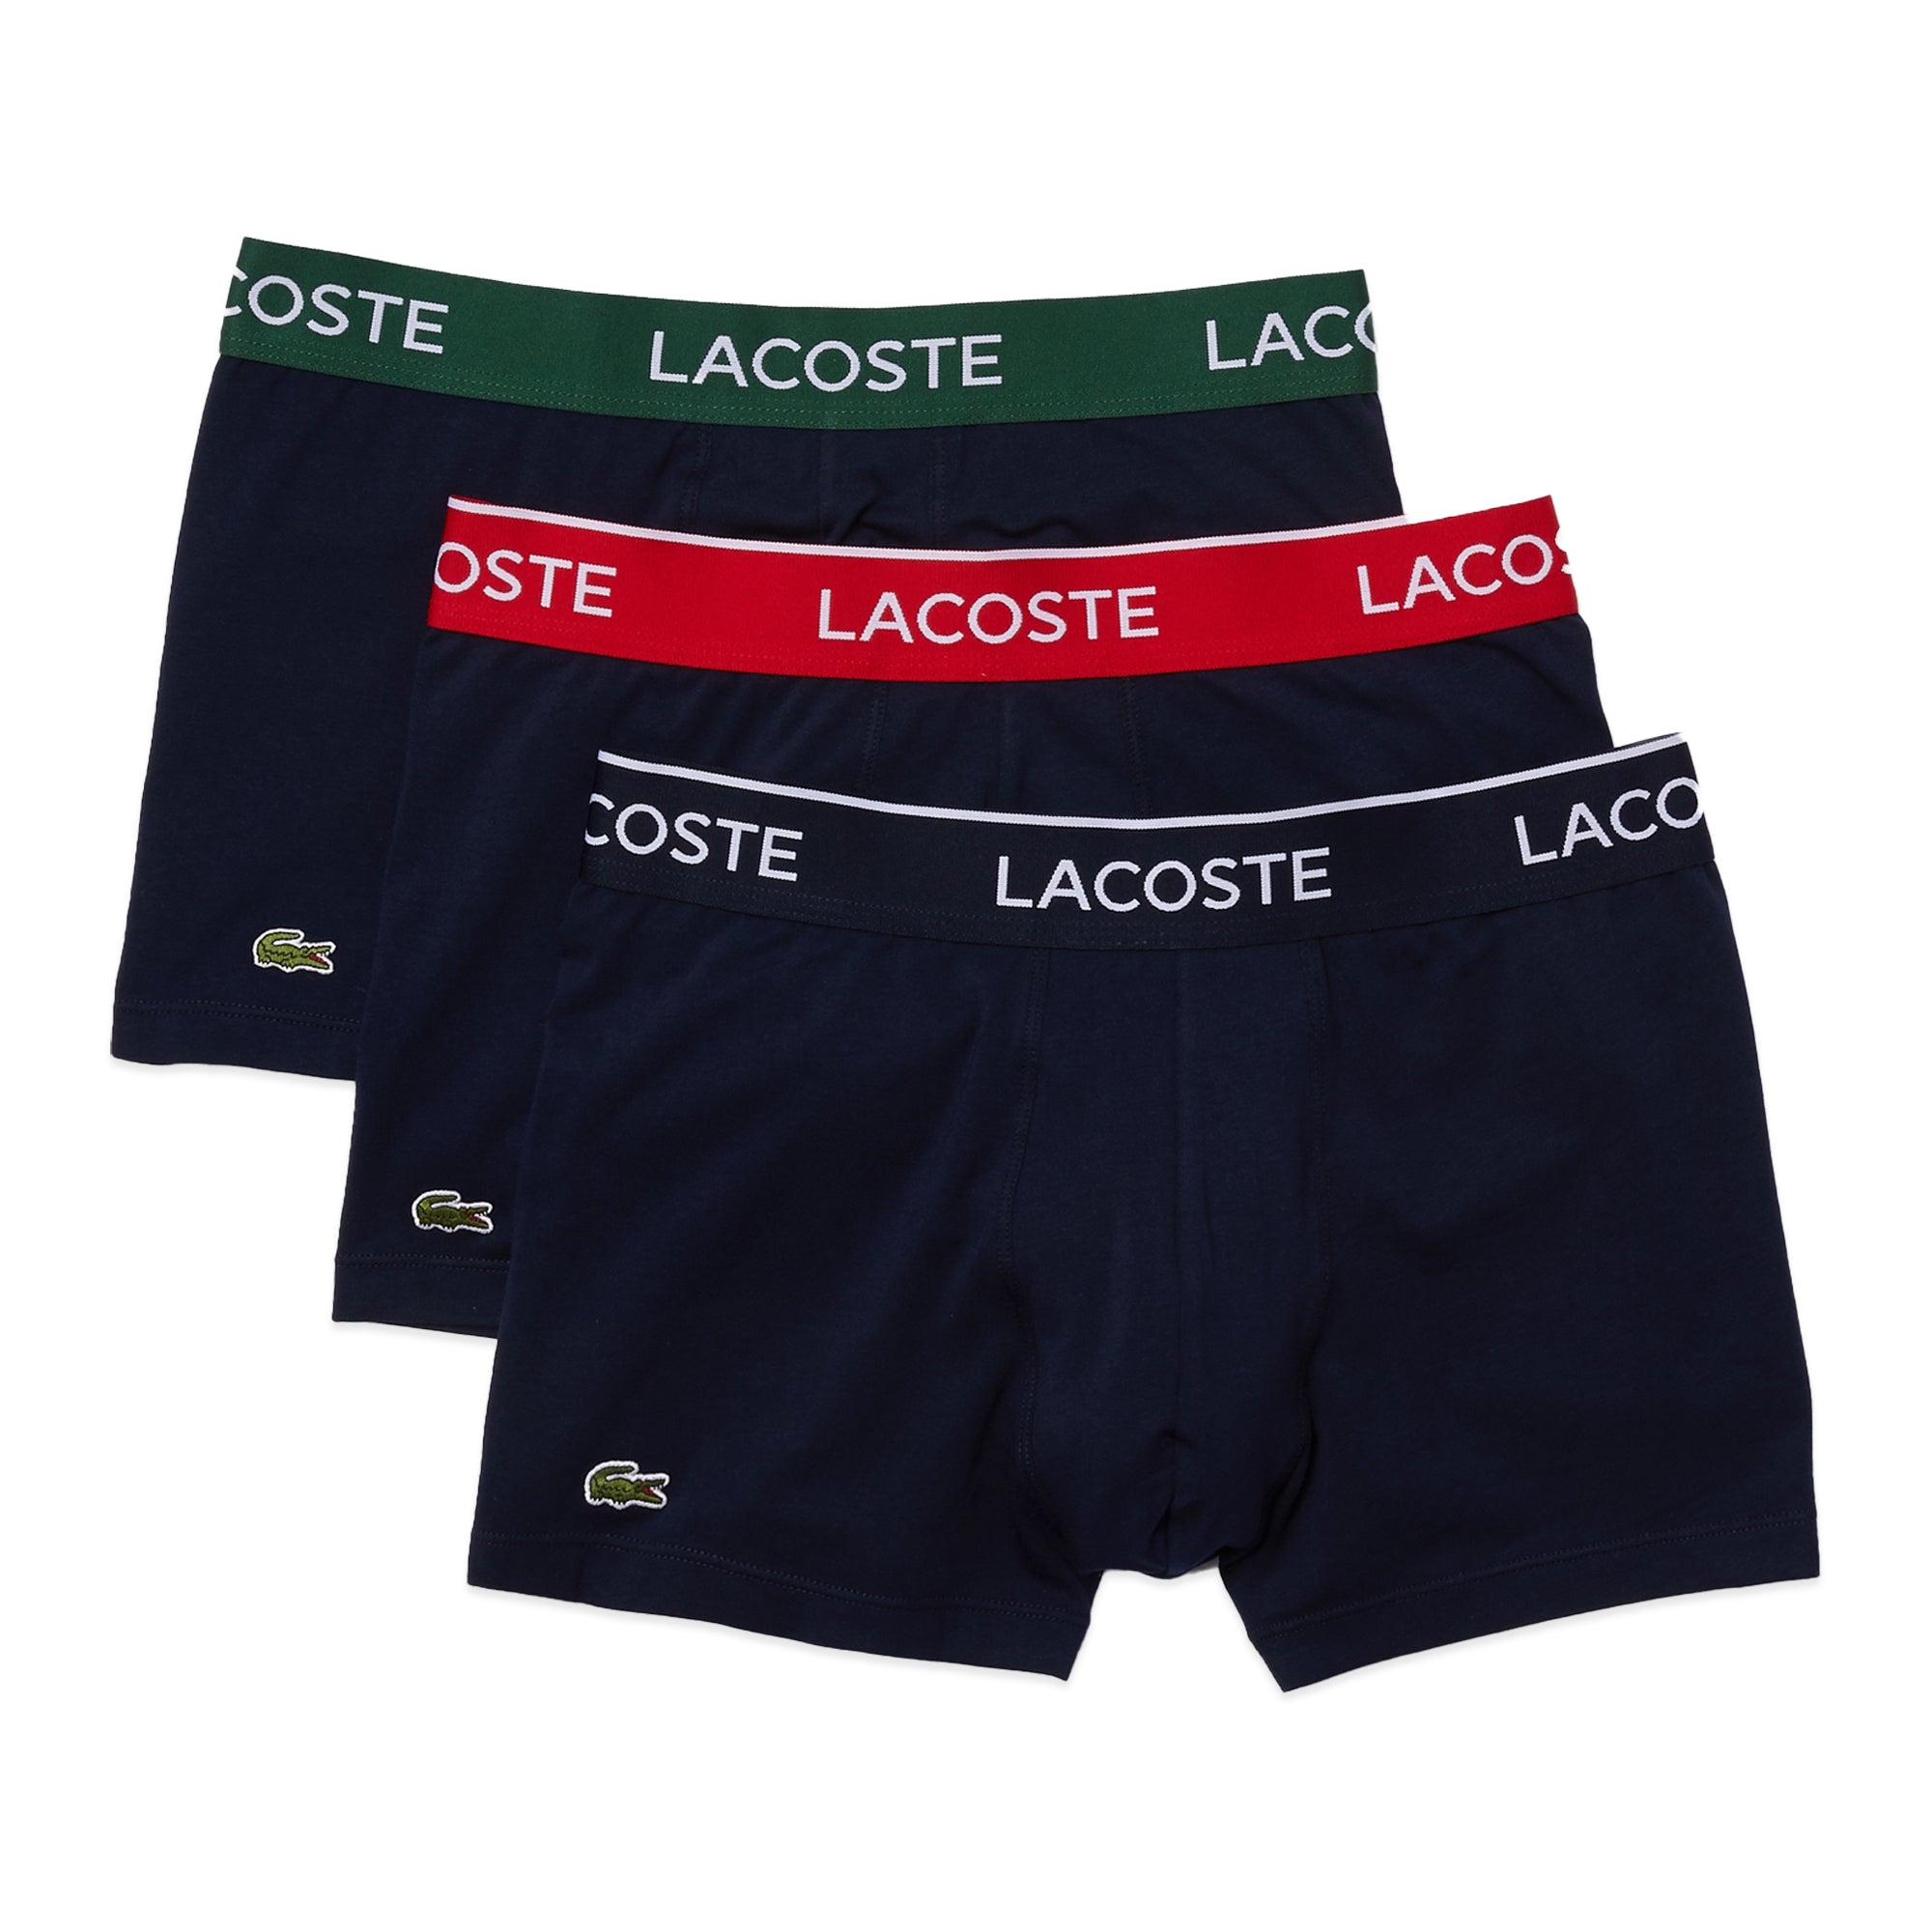 Lacoste 3 Pack Cotton Stretch Trunks - Navy with Red/Green/Navy Waistband